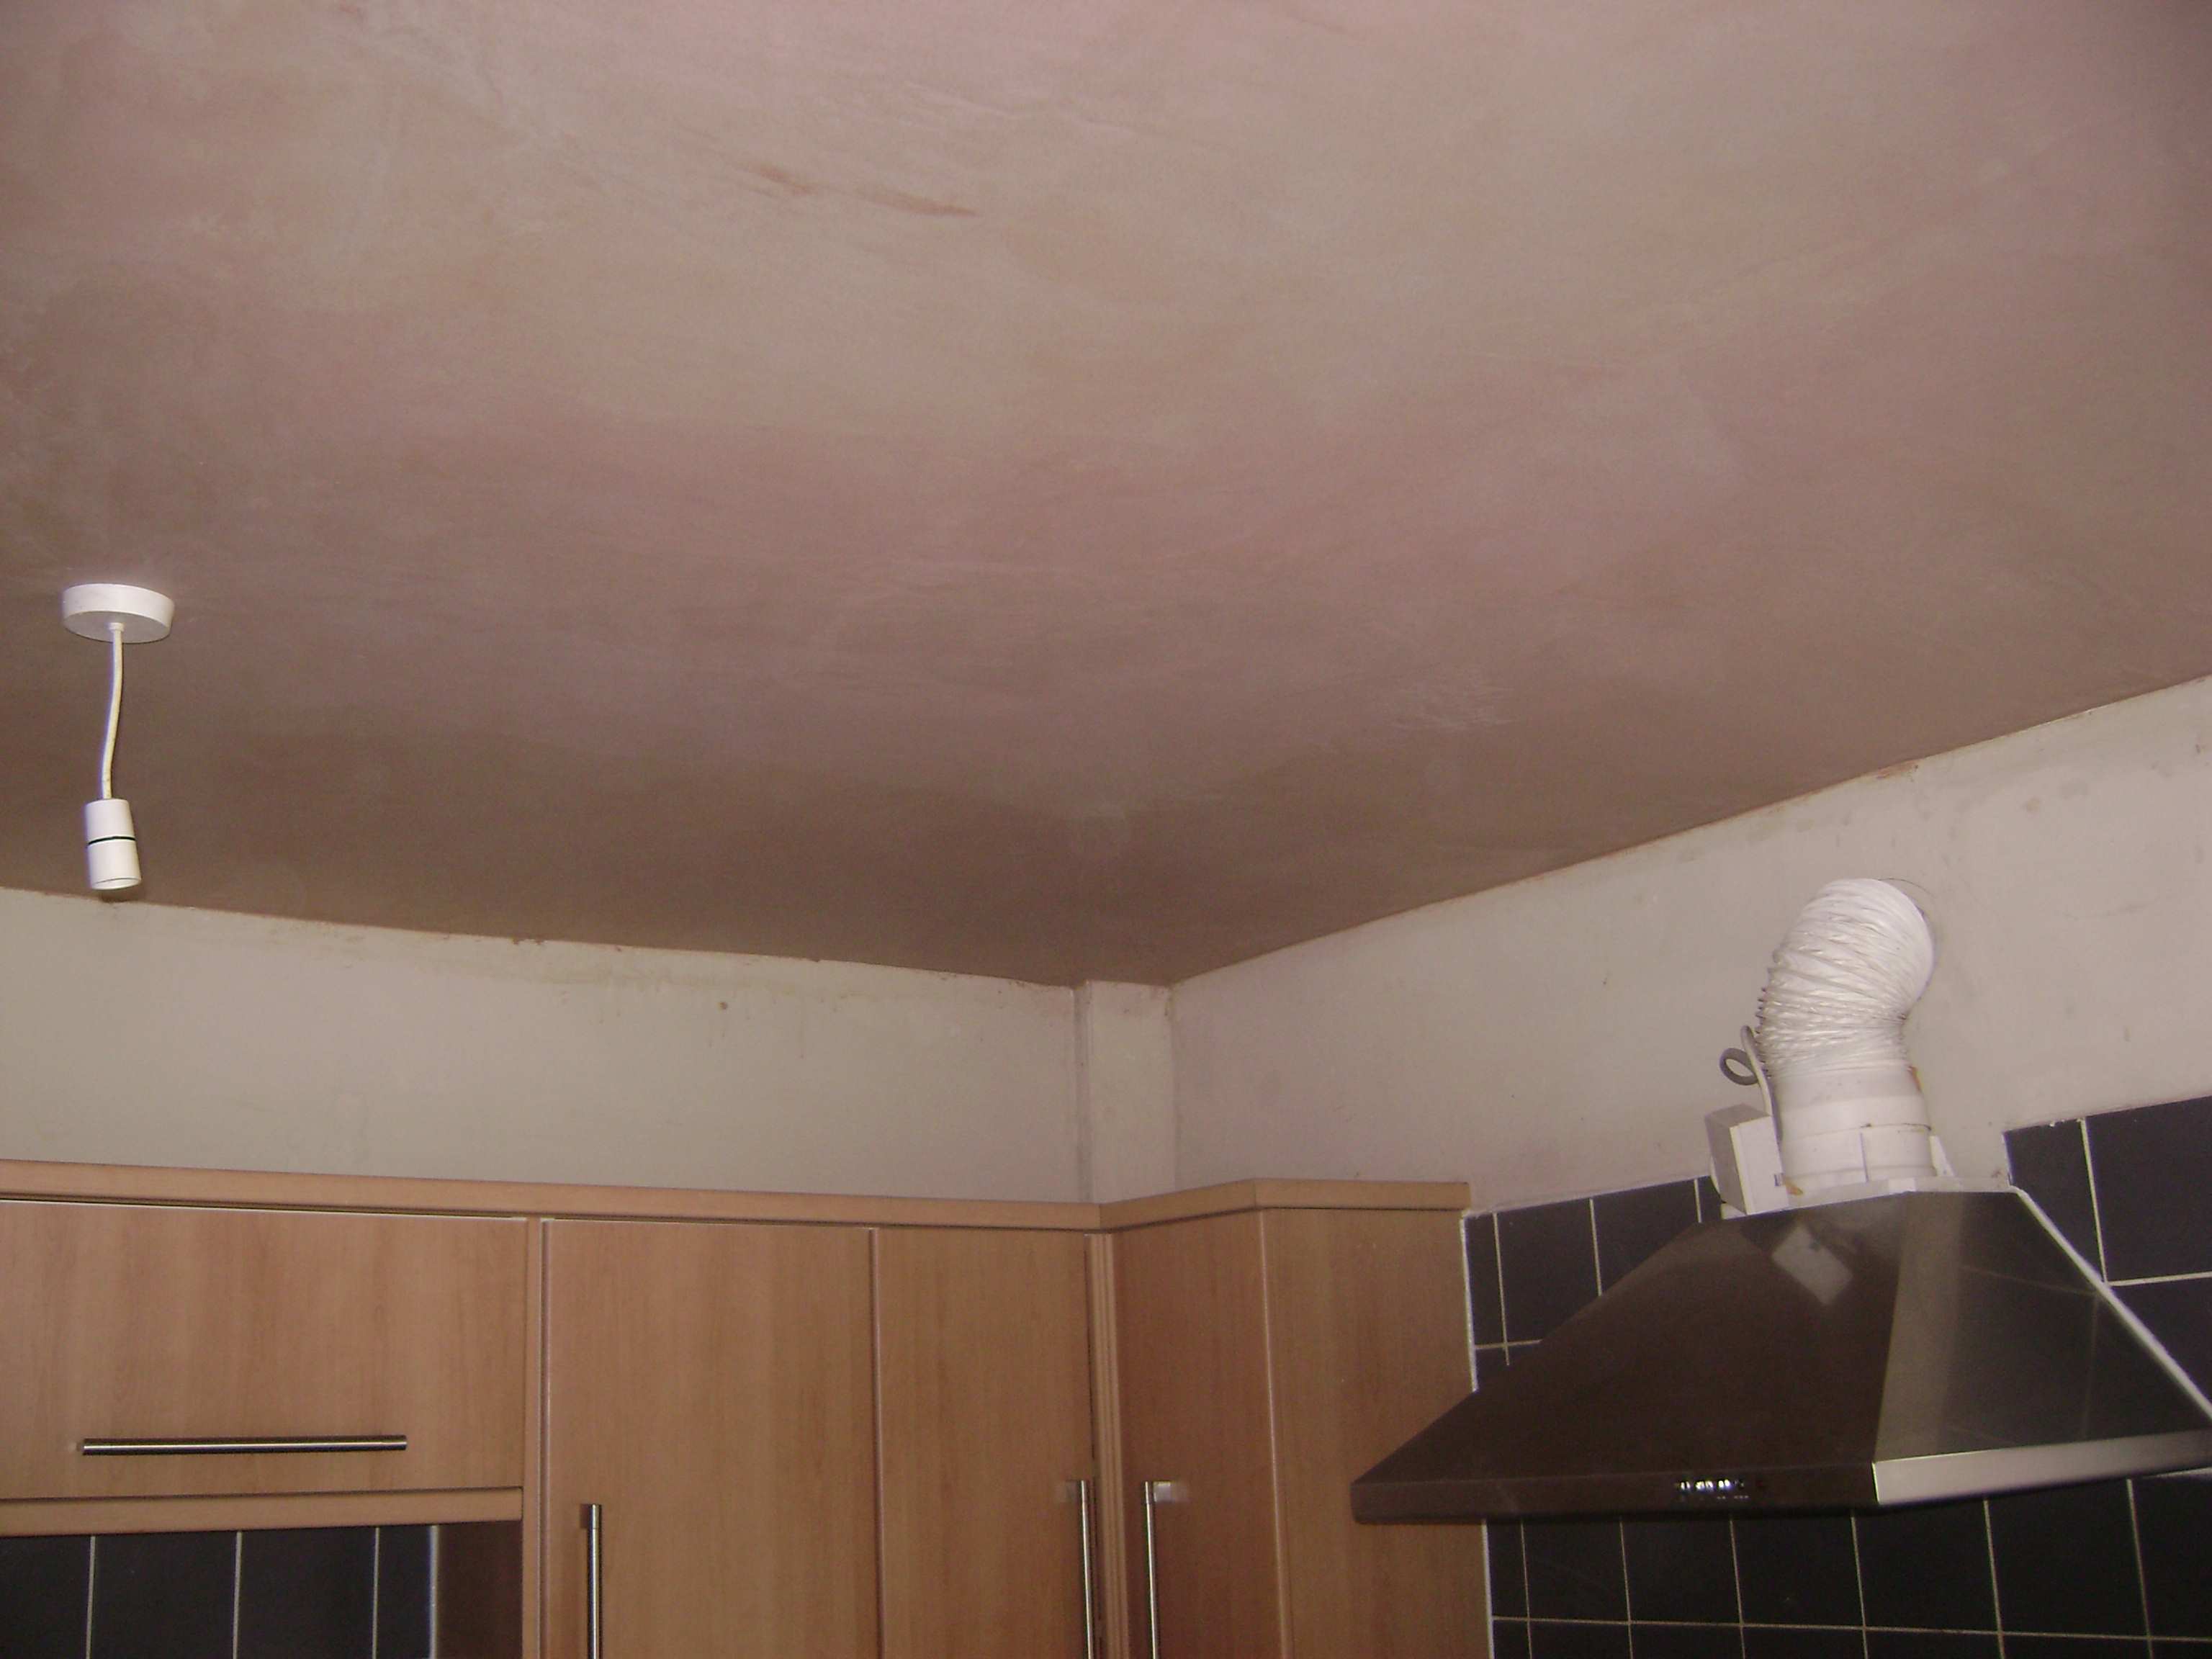 The ceiling was then plastered ready for the customer to decorate once dry